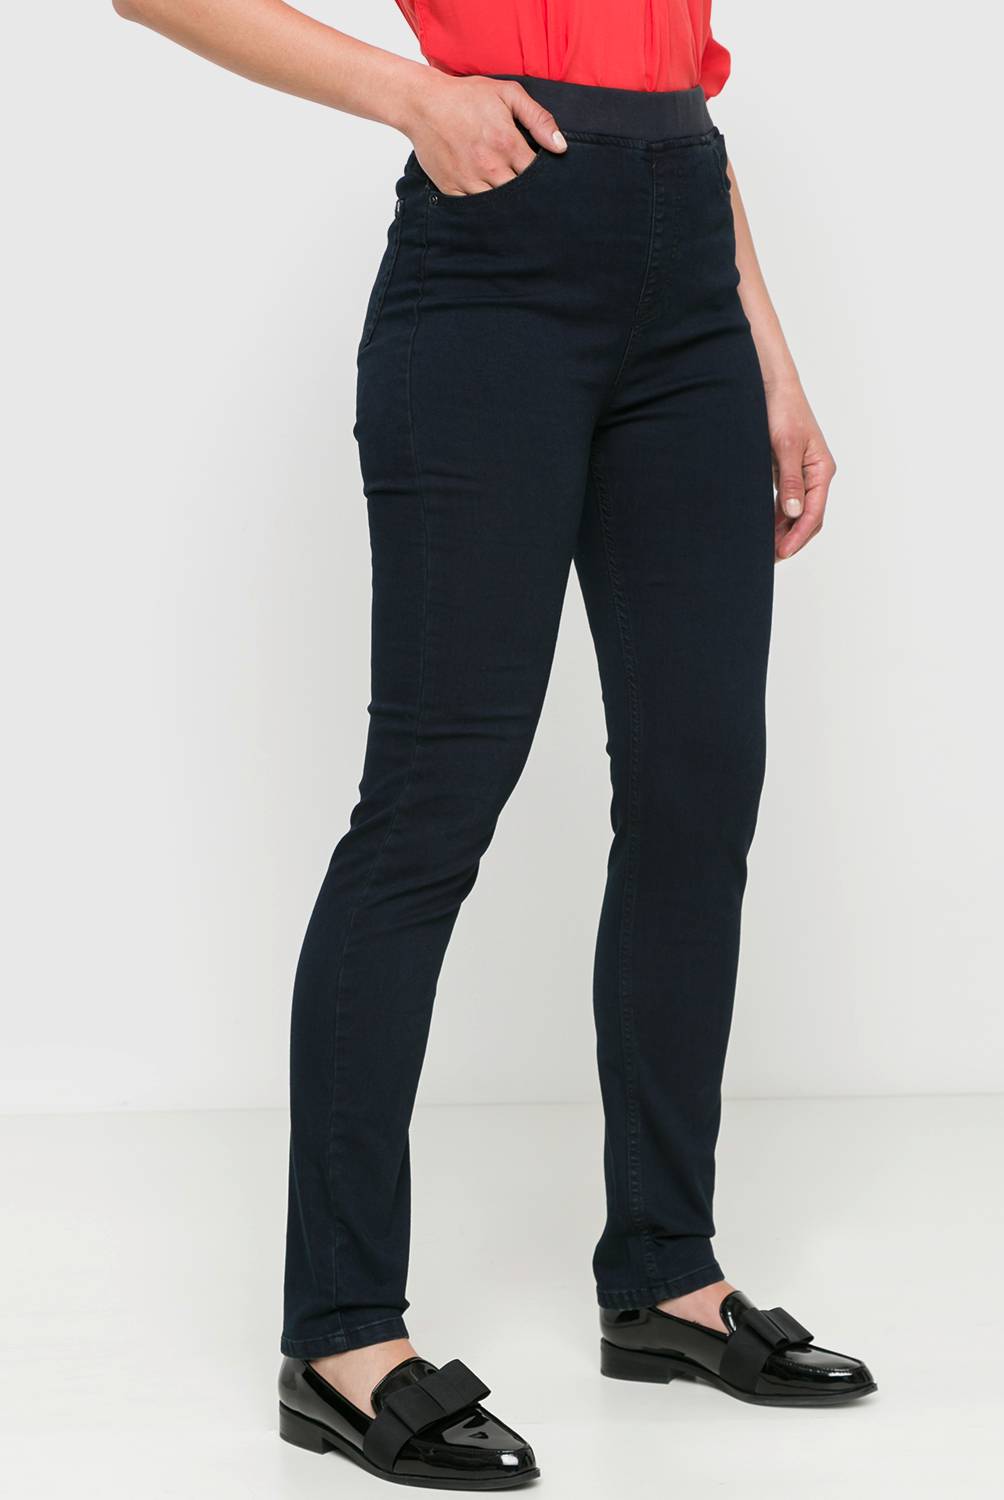 Newport - Jeans Mujer